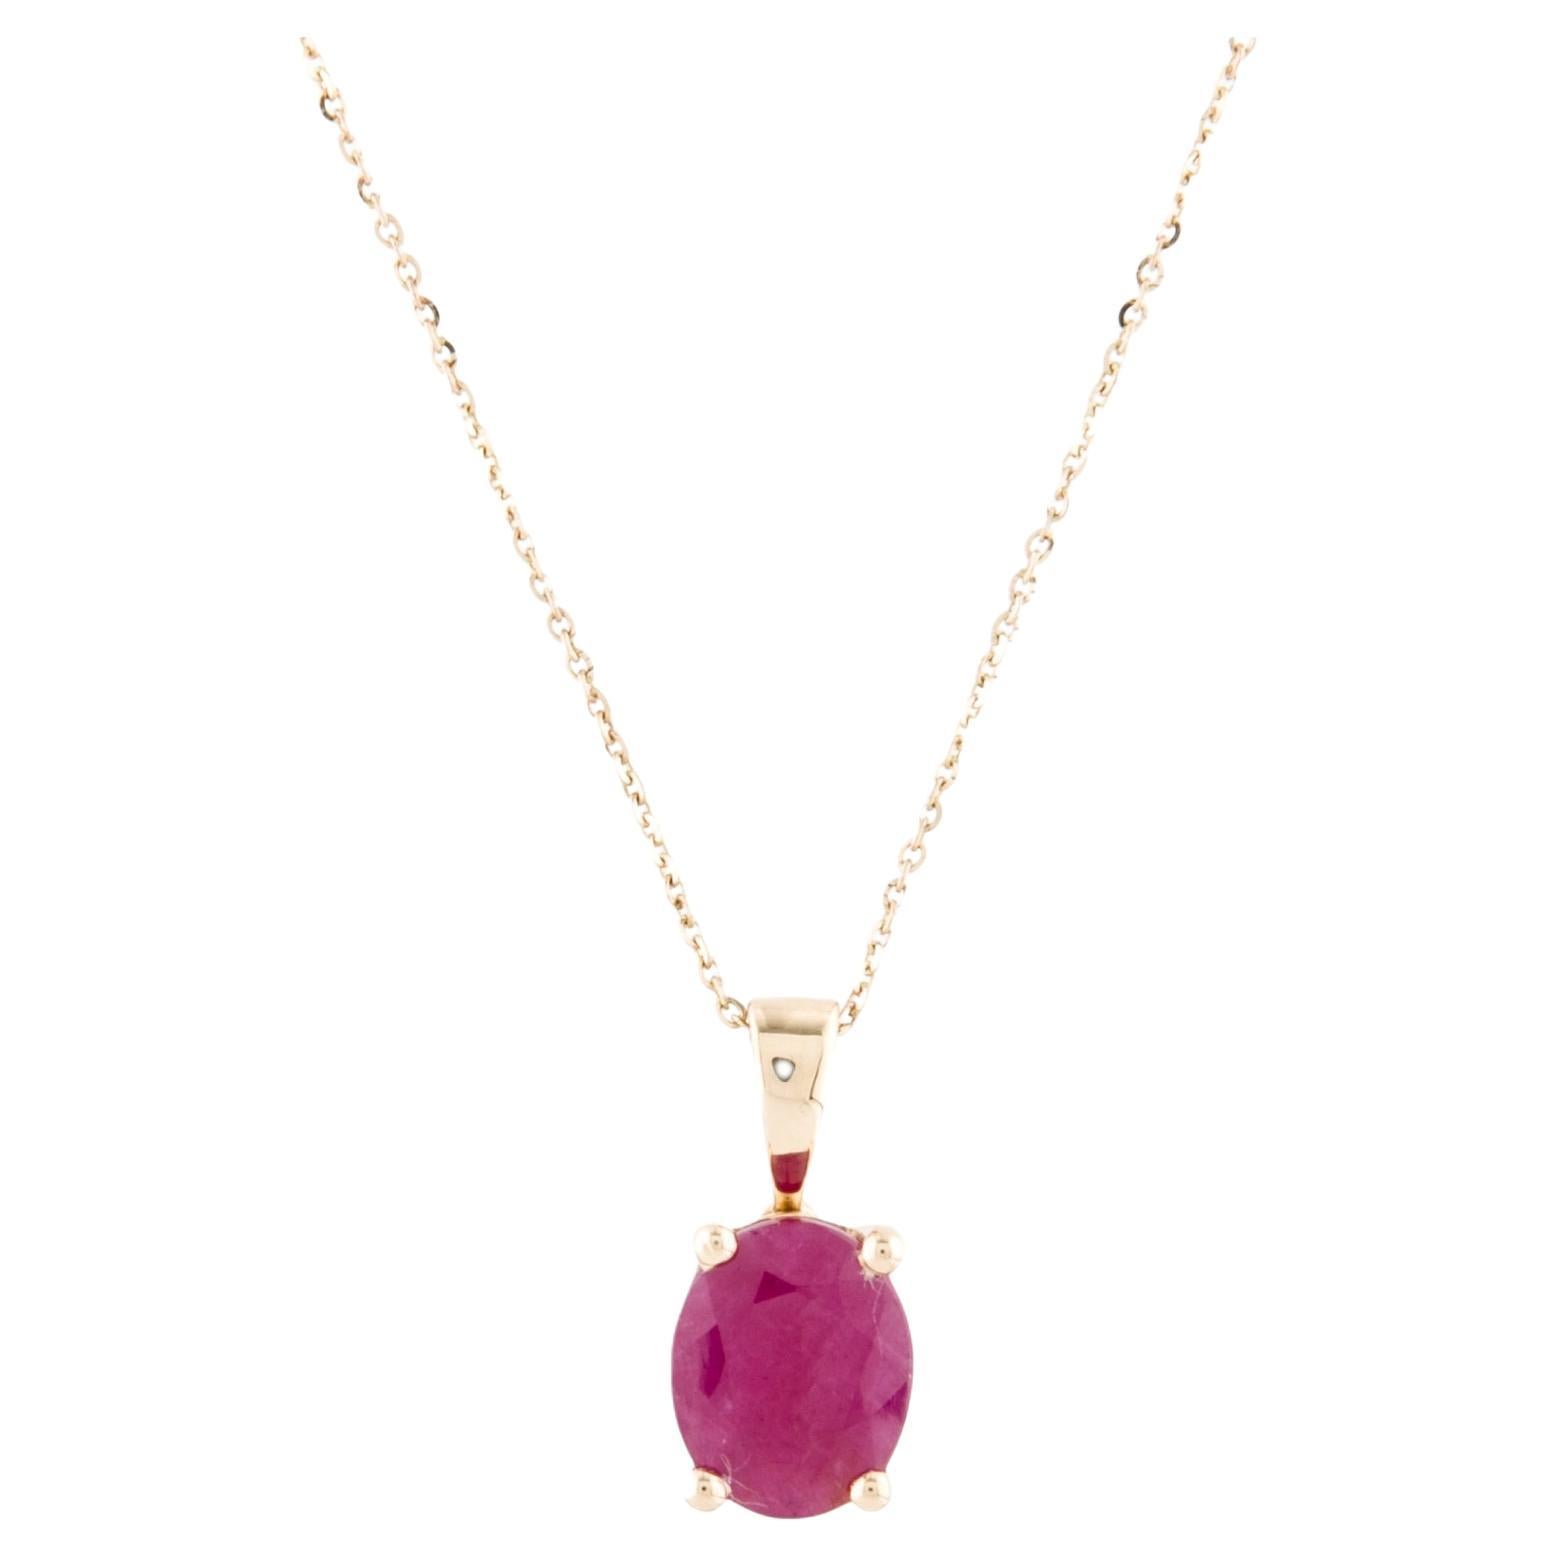 Luxurious 14K Yellow Gold Oval Ruby Pendant Necklace, 2.87ct, 18" Length